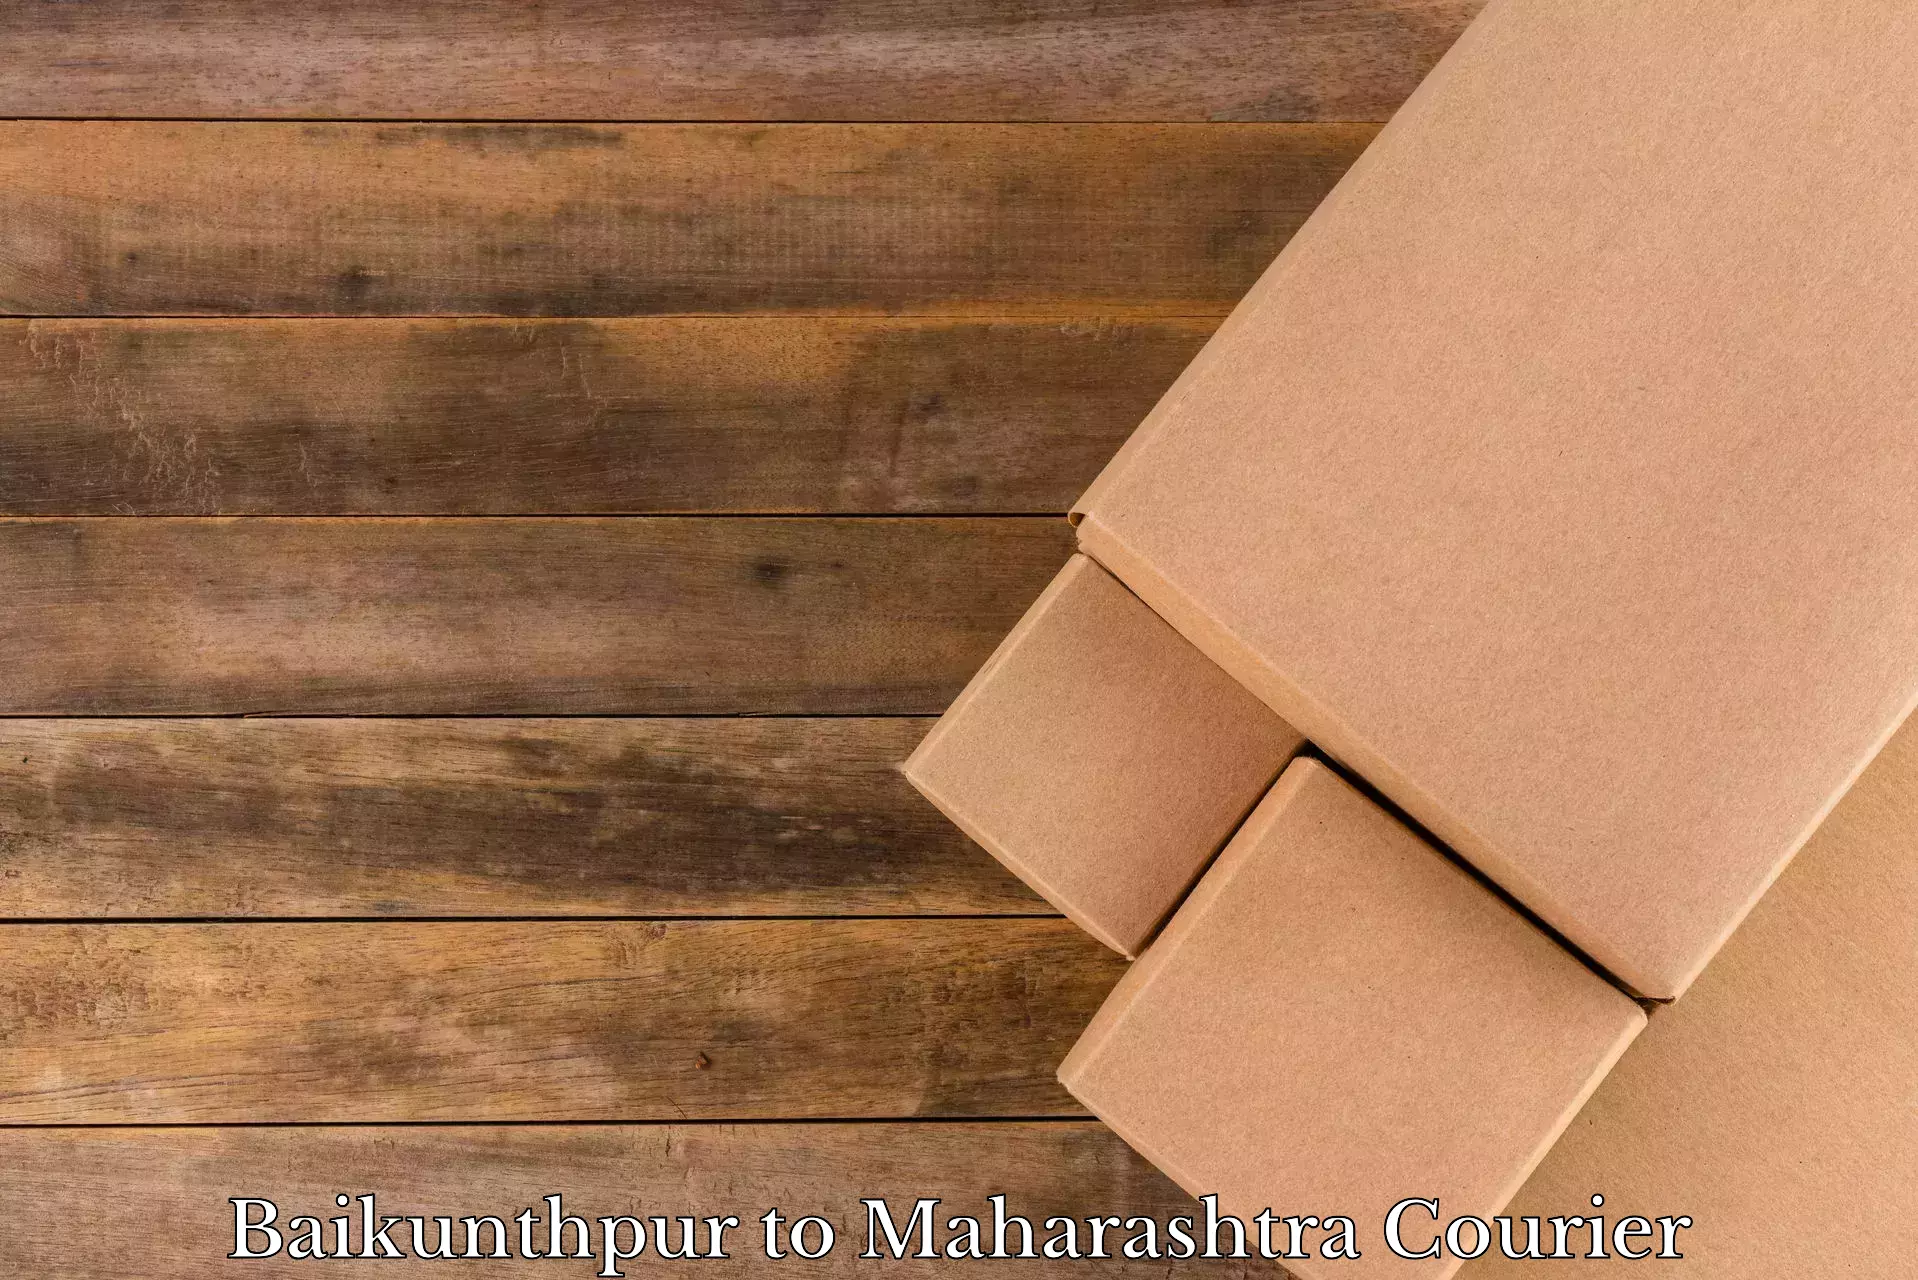 Affordable relocation services in Baikunthpur to Maharashtra